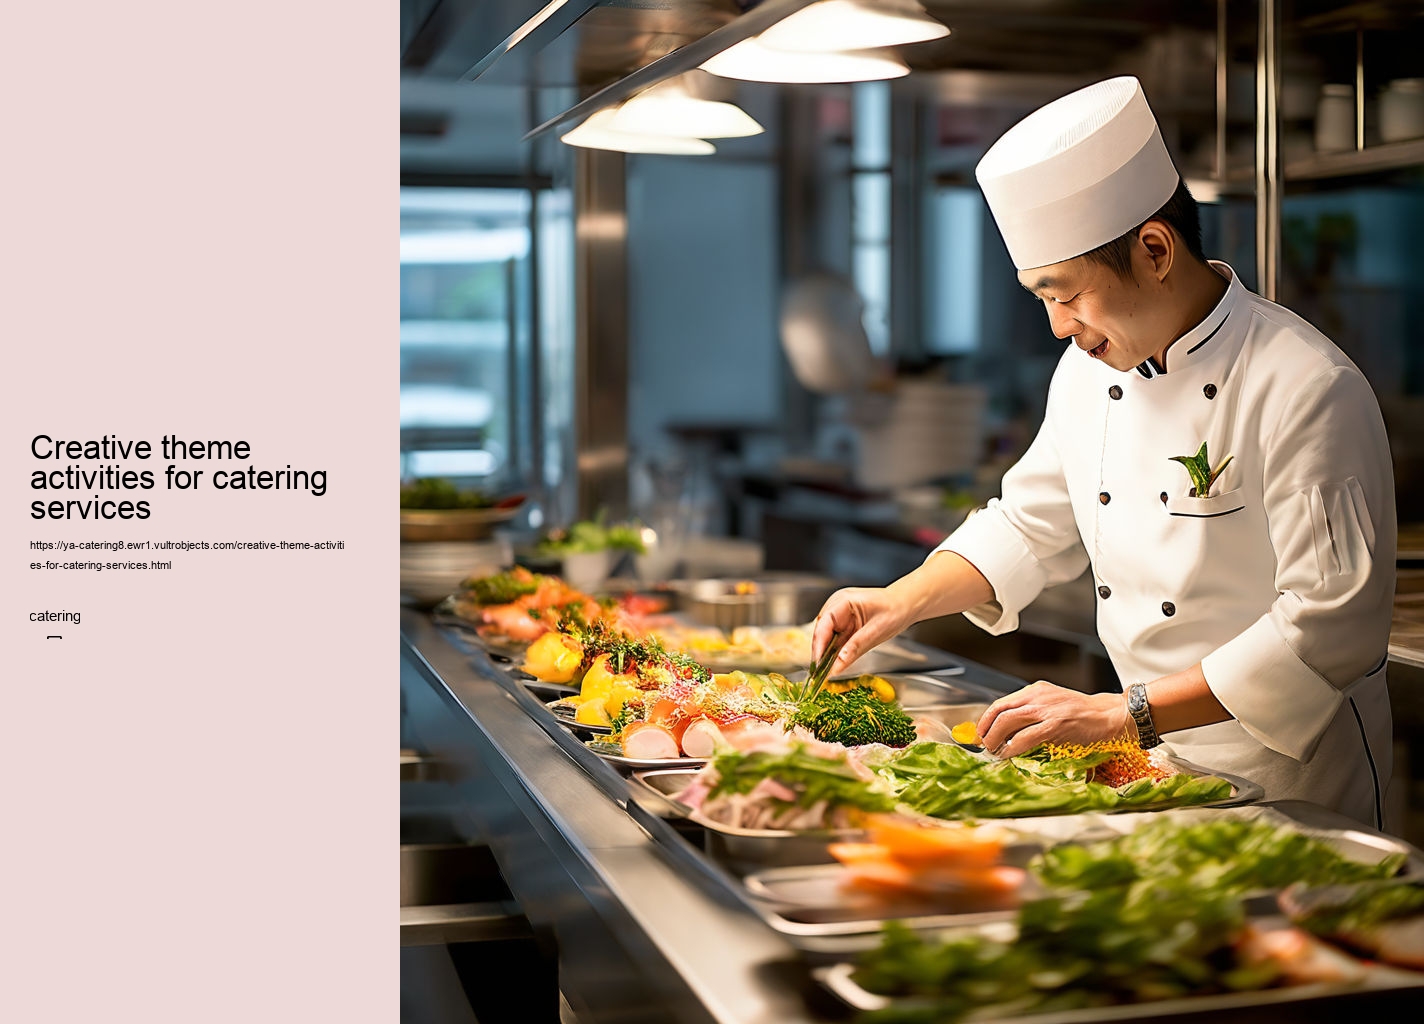 Creative theme activities for catering services